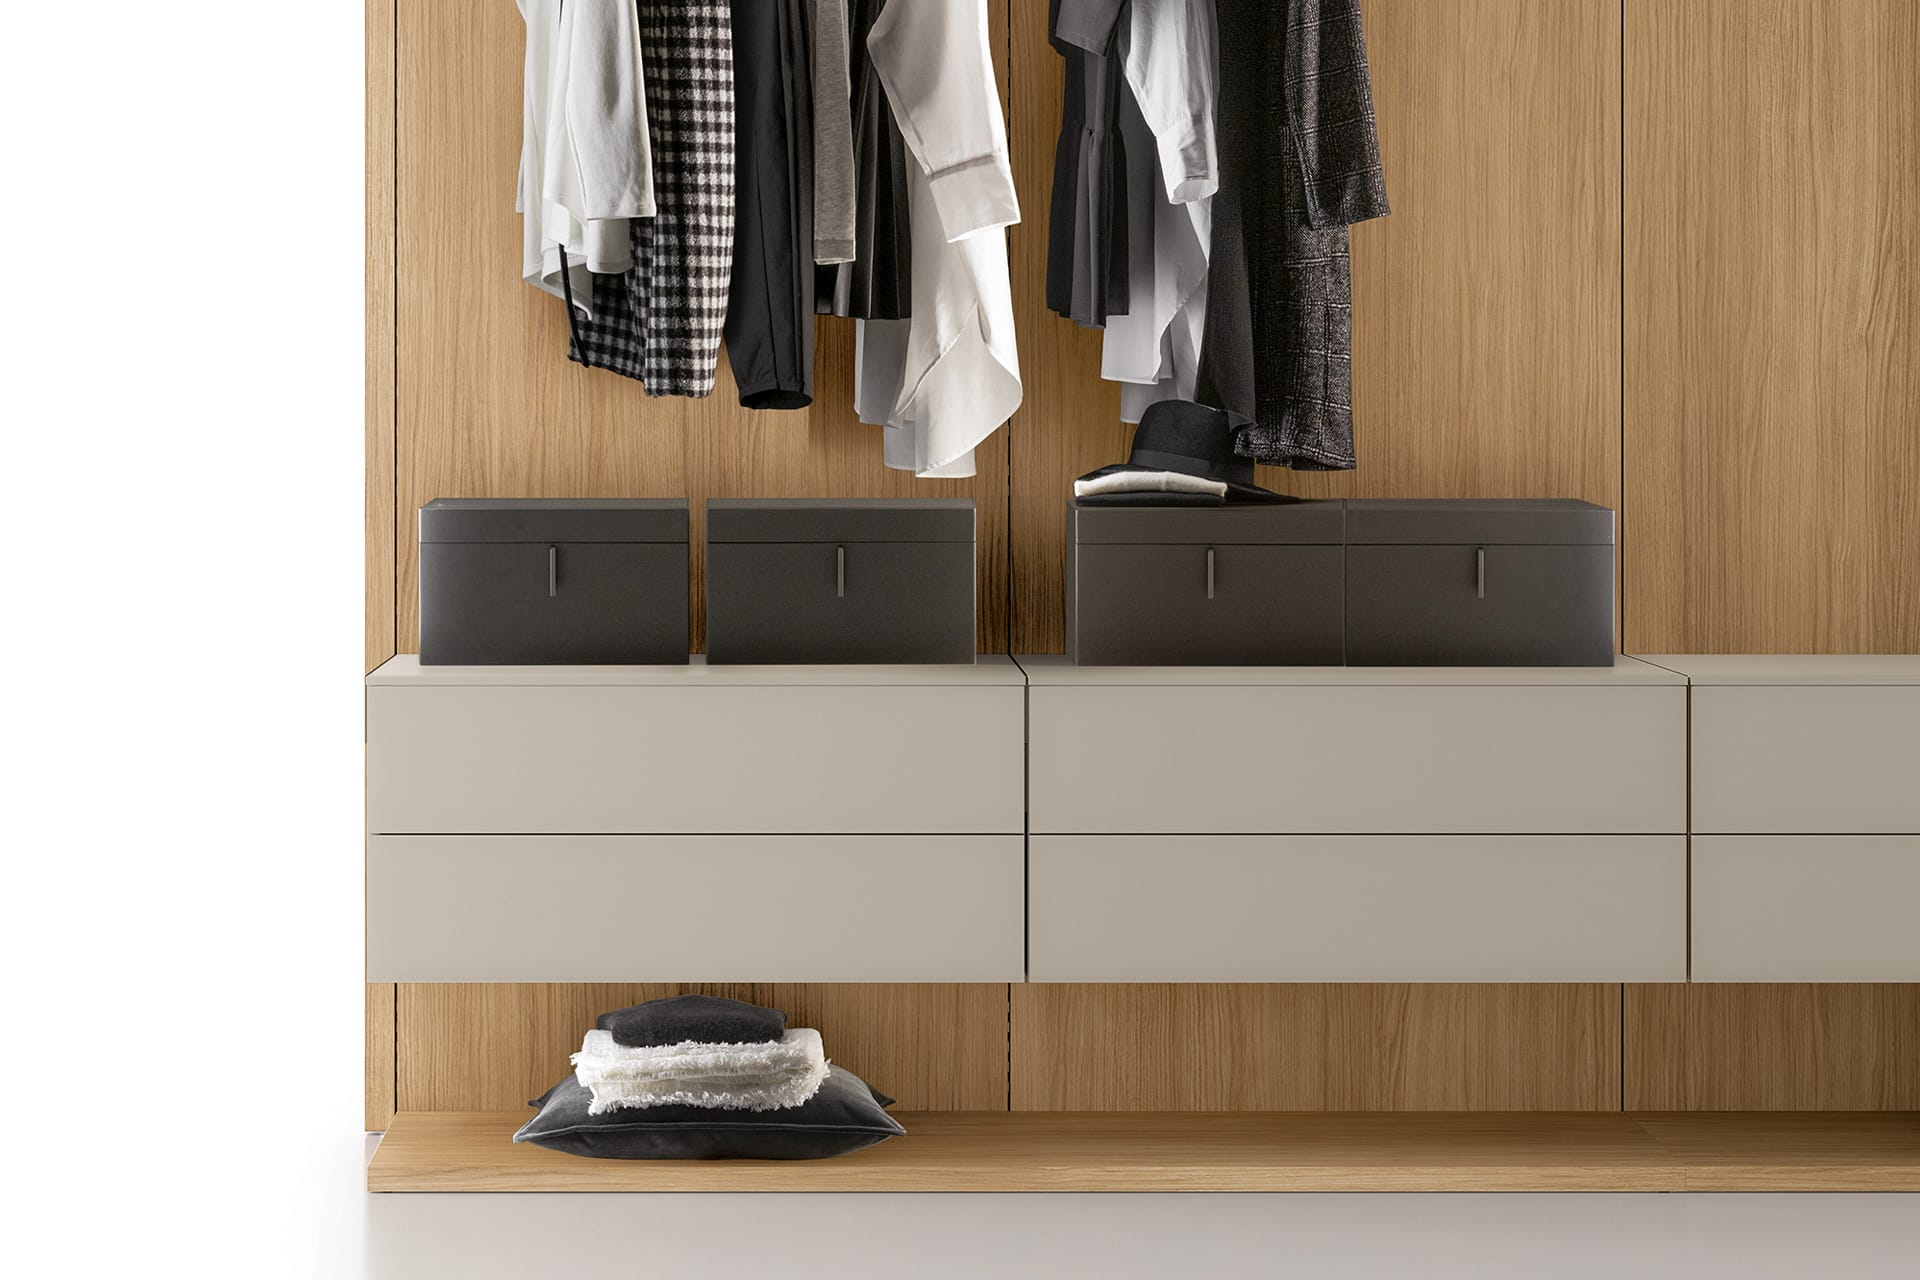 Pull-out trouser holder and other accessories for your wardrobe